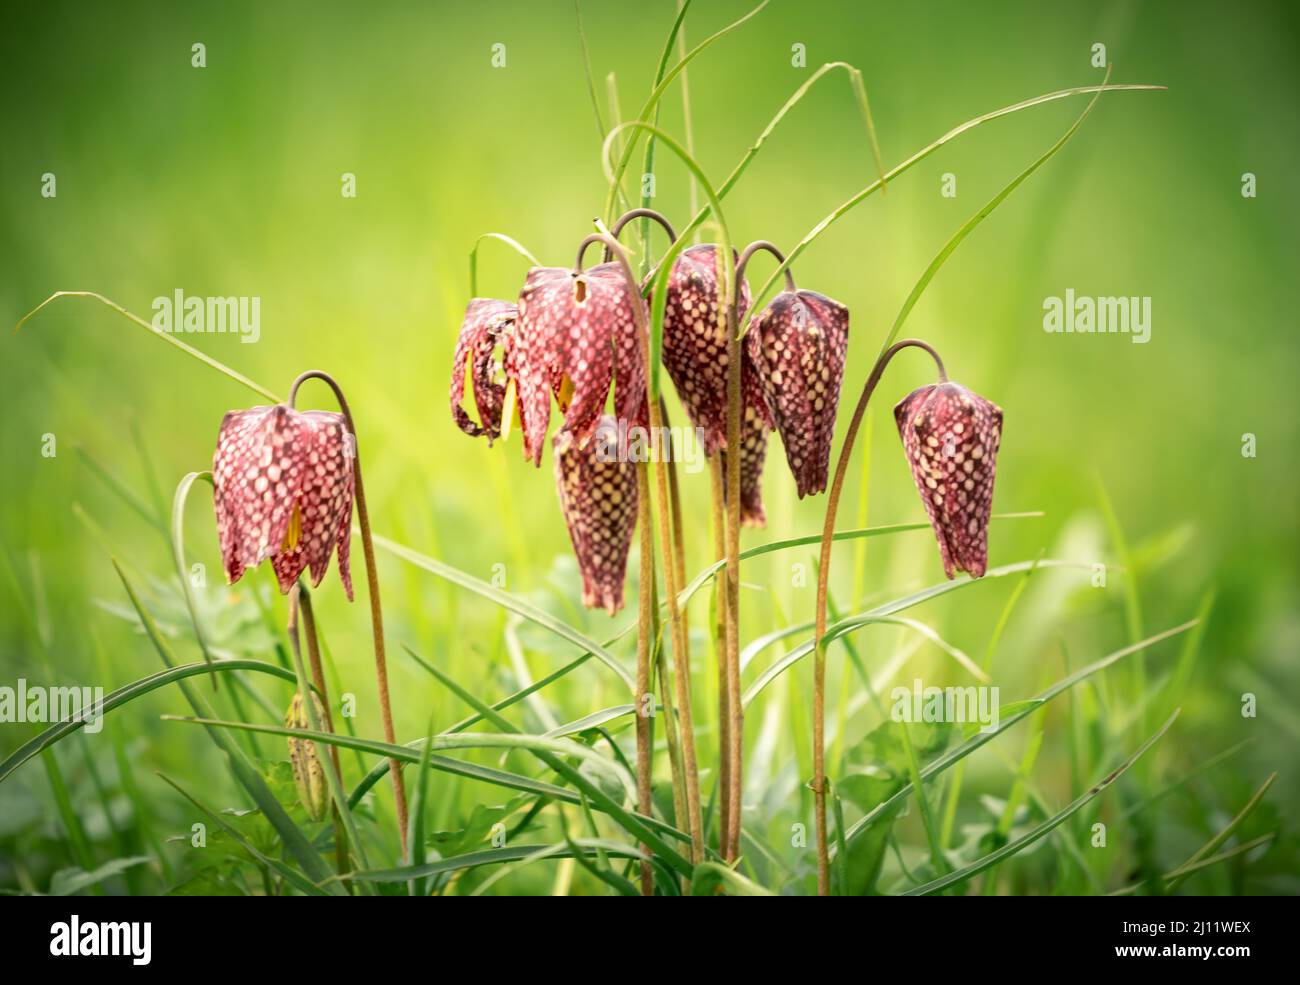 Close up on endangered wild Chess Flowers in a natural environment Stock Photo